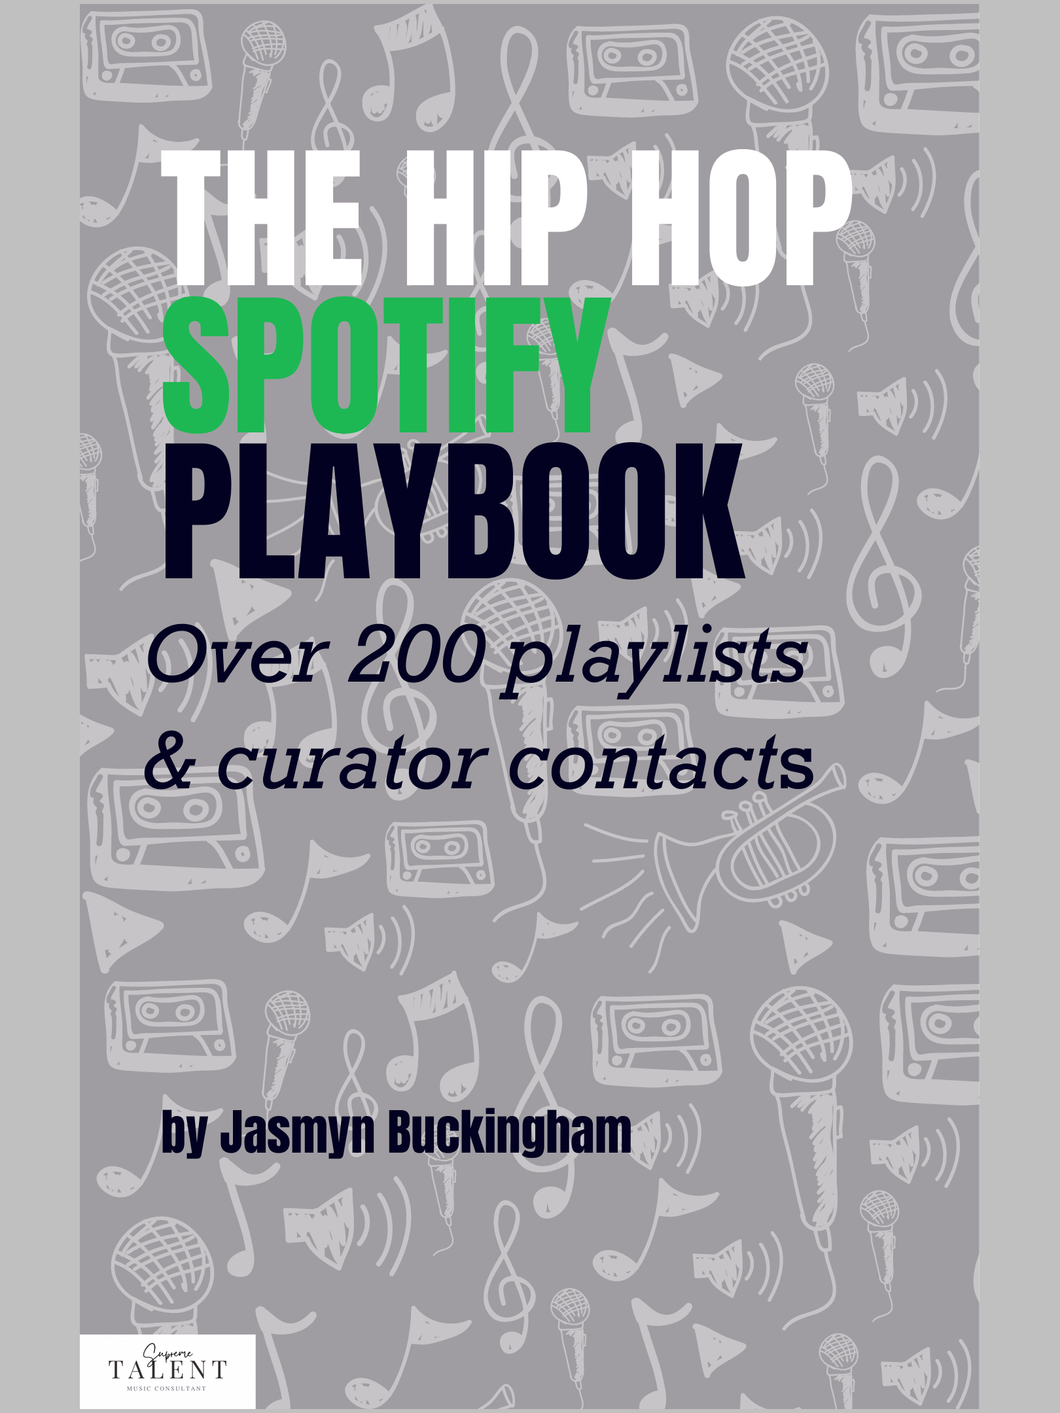 The Hip Hop Spotify Playbook